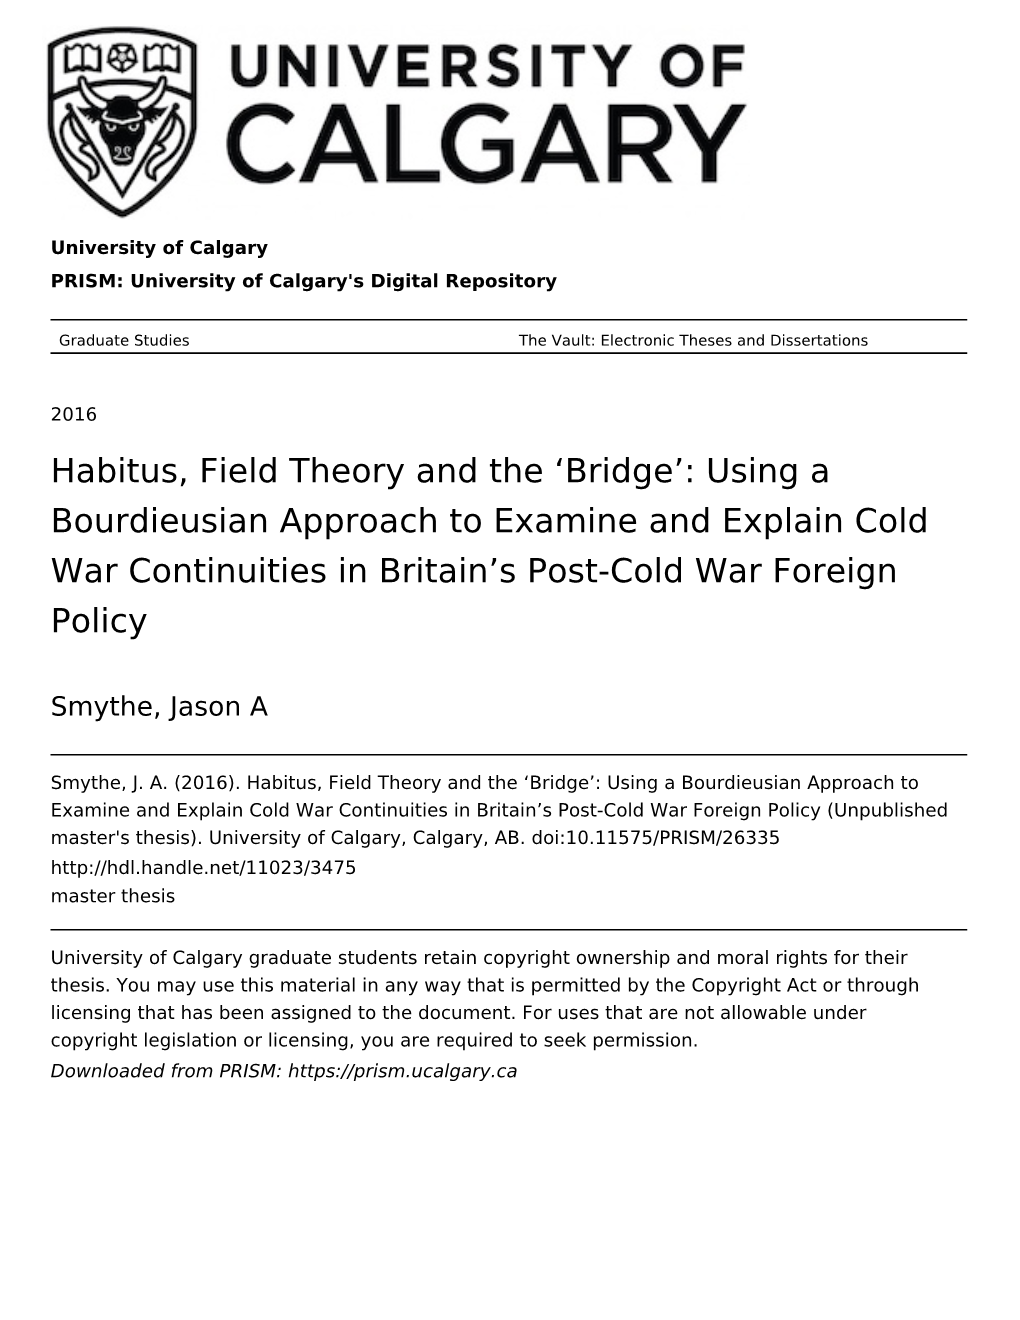 Habitus, Field Theory and the ‘Bridge’: Using a Bourdieusian Approach to Examine and Explain Cold War Continuities in Britain’S Post-Cold War Foreign Policy